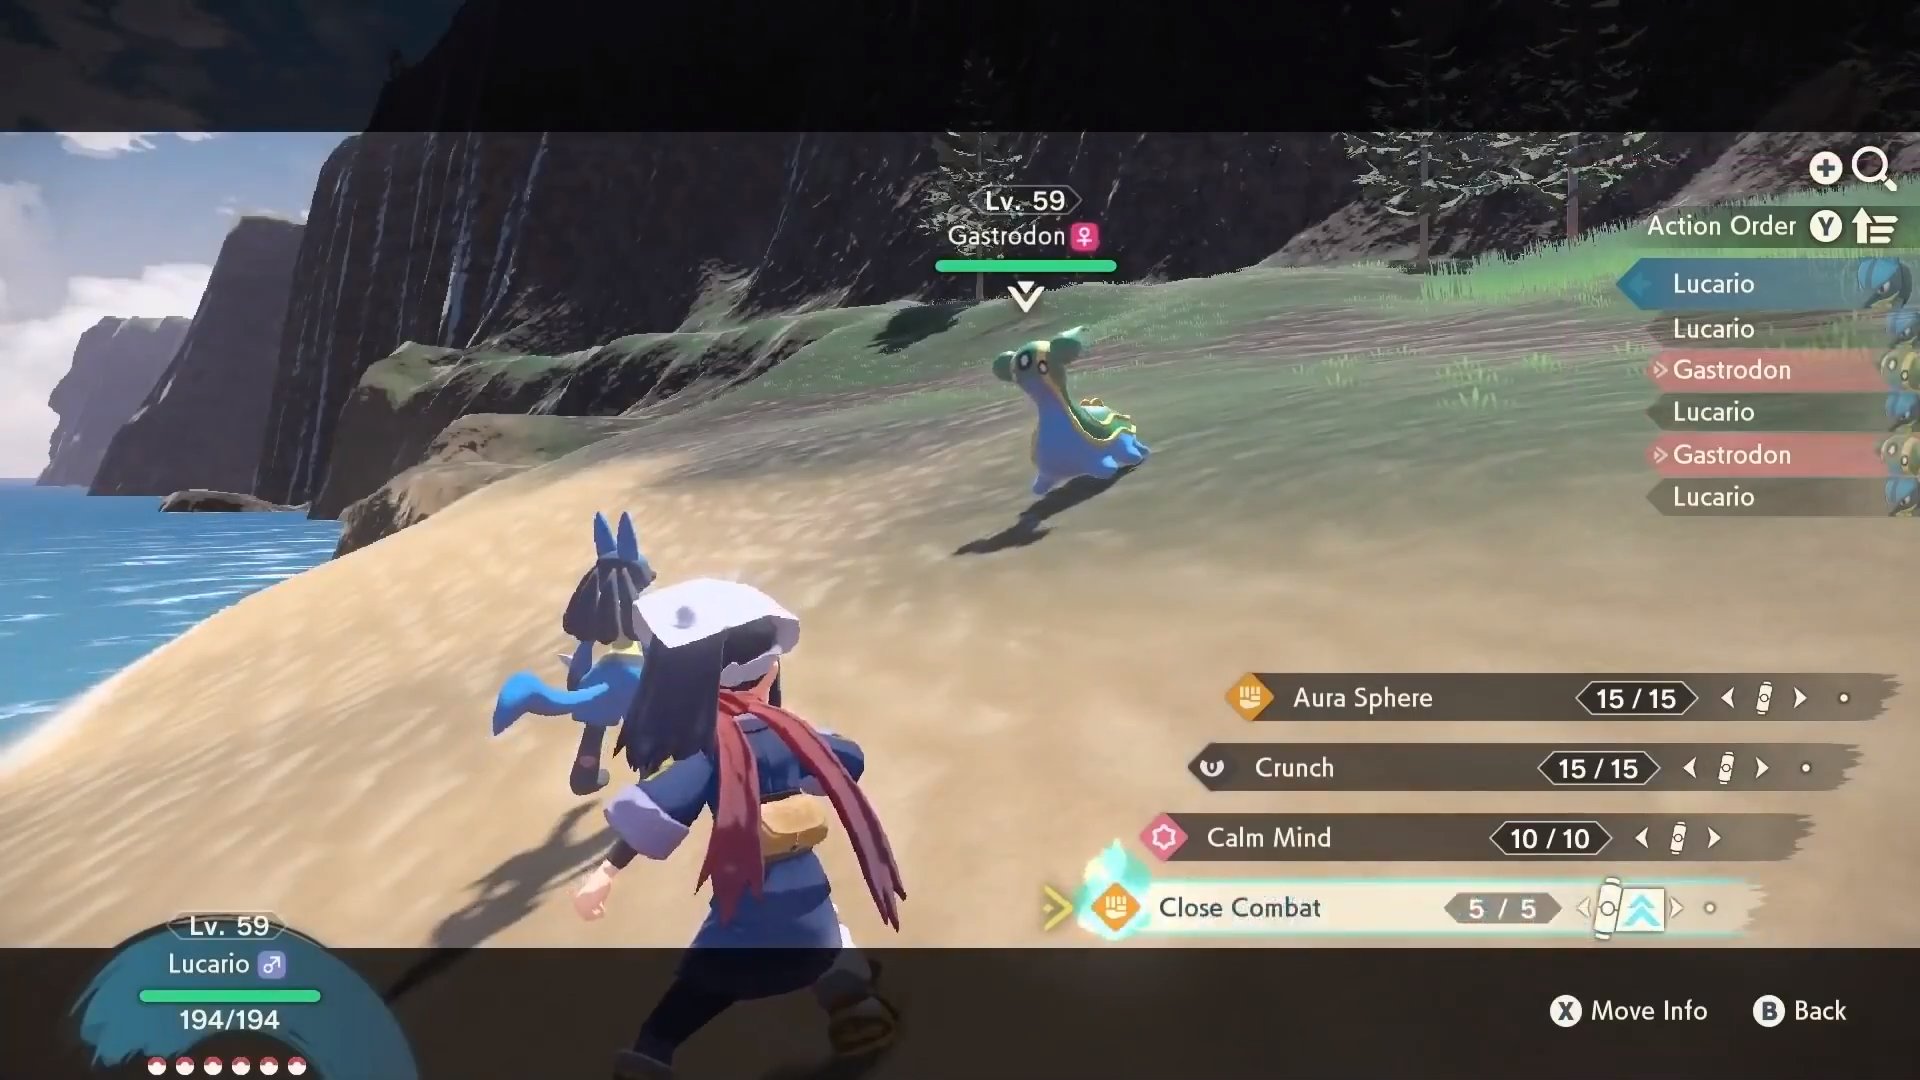 Pokémon Legends: Arceus Story/Gameplay Review - The Game of Nerds